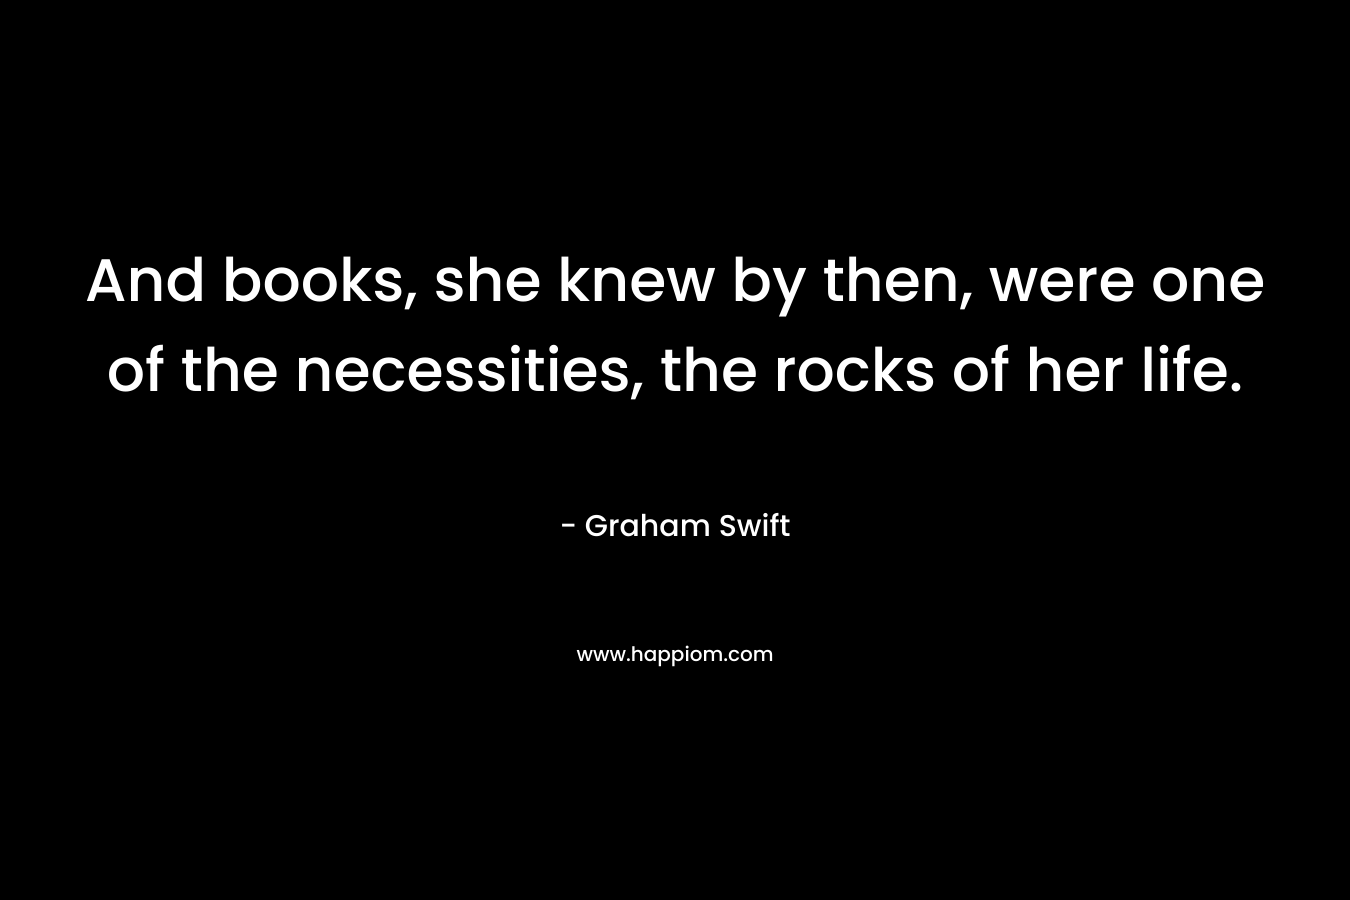 And books, she knew by then, were one of the necessities, the rocks of her life. – Graham Swift